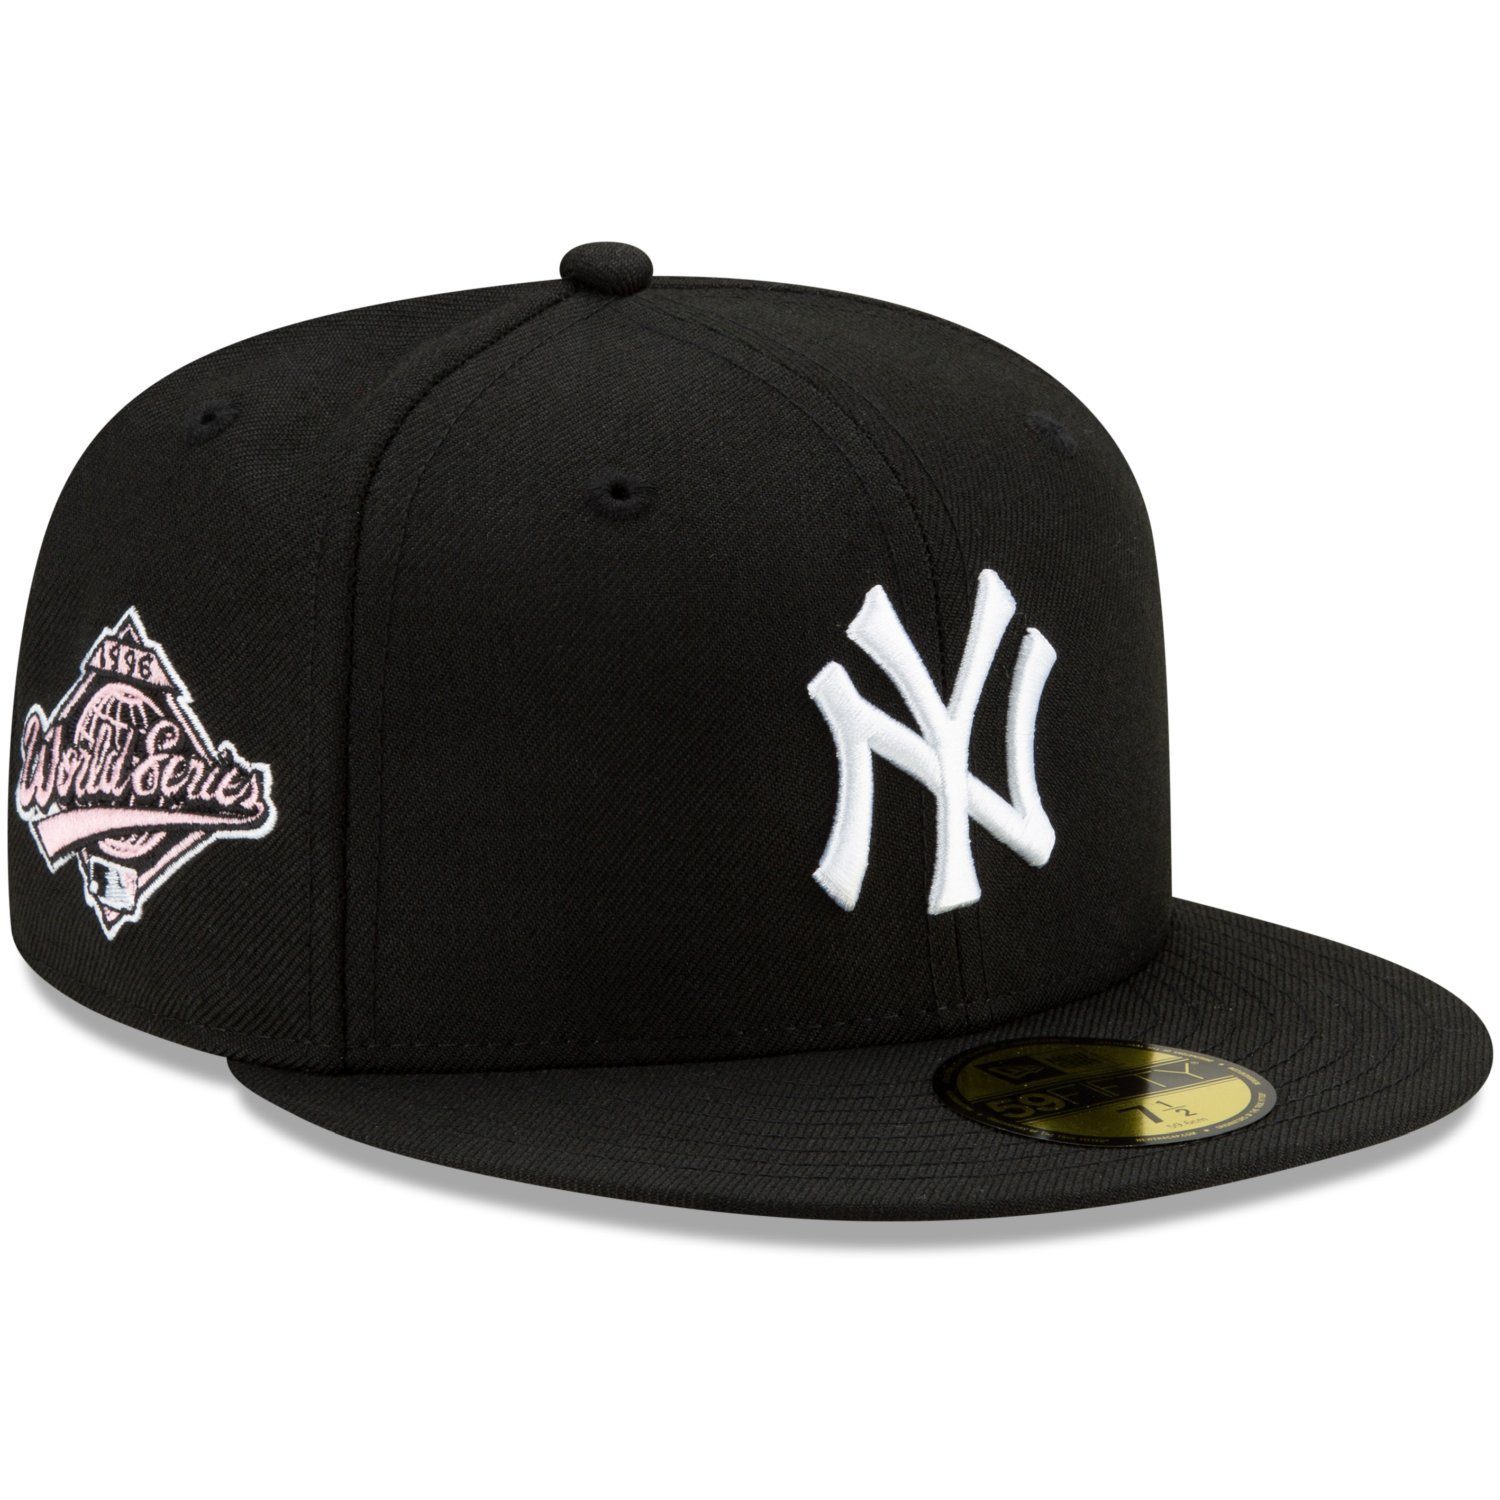 New Era Fitted Cap 59Fifty LIFESTYLE New York Yankees